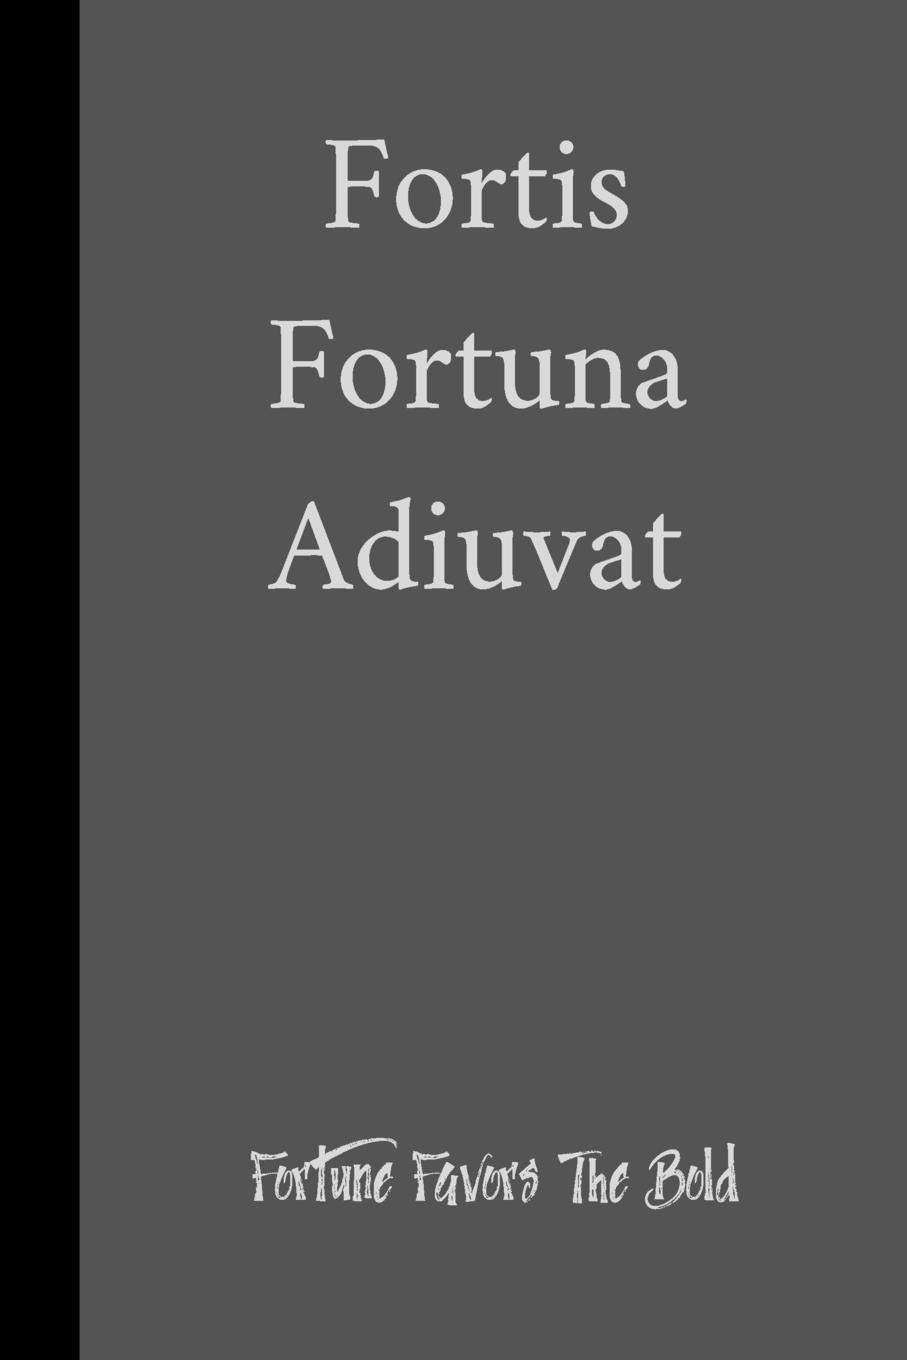 Buy Fortis Fortuna Adiuvat Fortune Favors The Bold: small lined John Wick Notebook / Travel Journal to write in (6'' x 9'') 120 pages Book Online at Low Prices in India